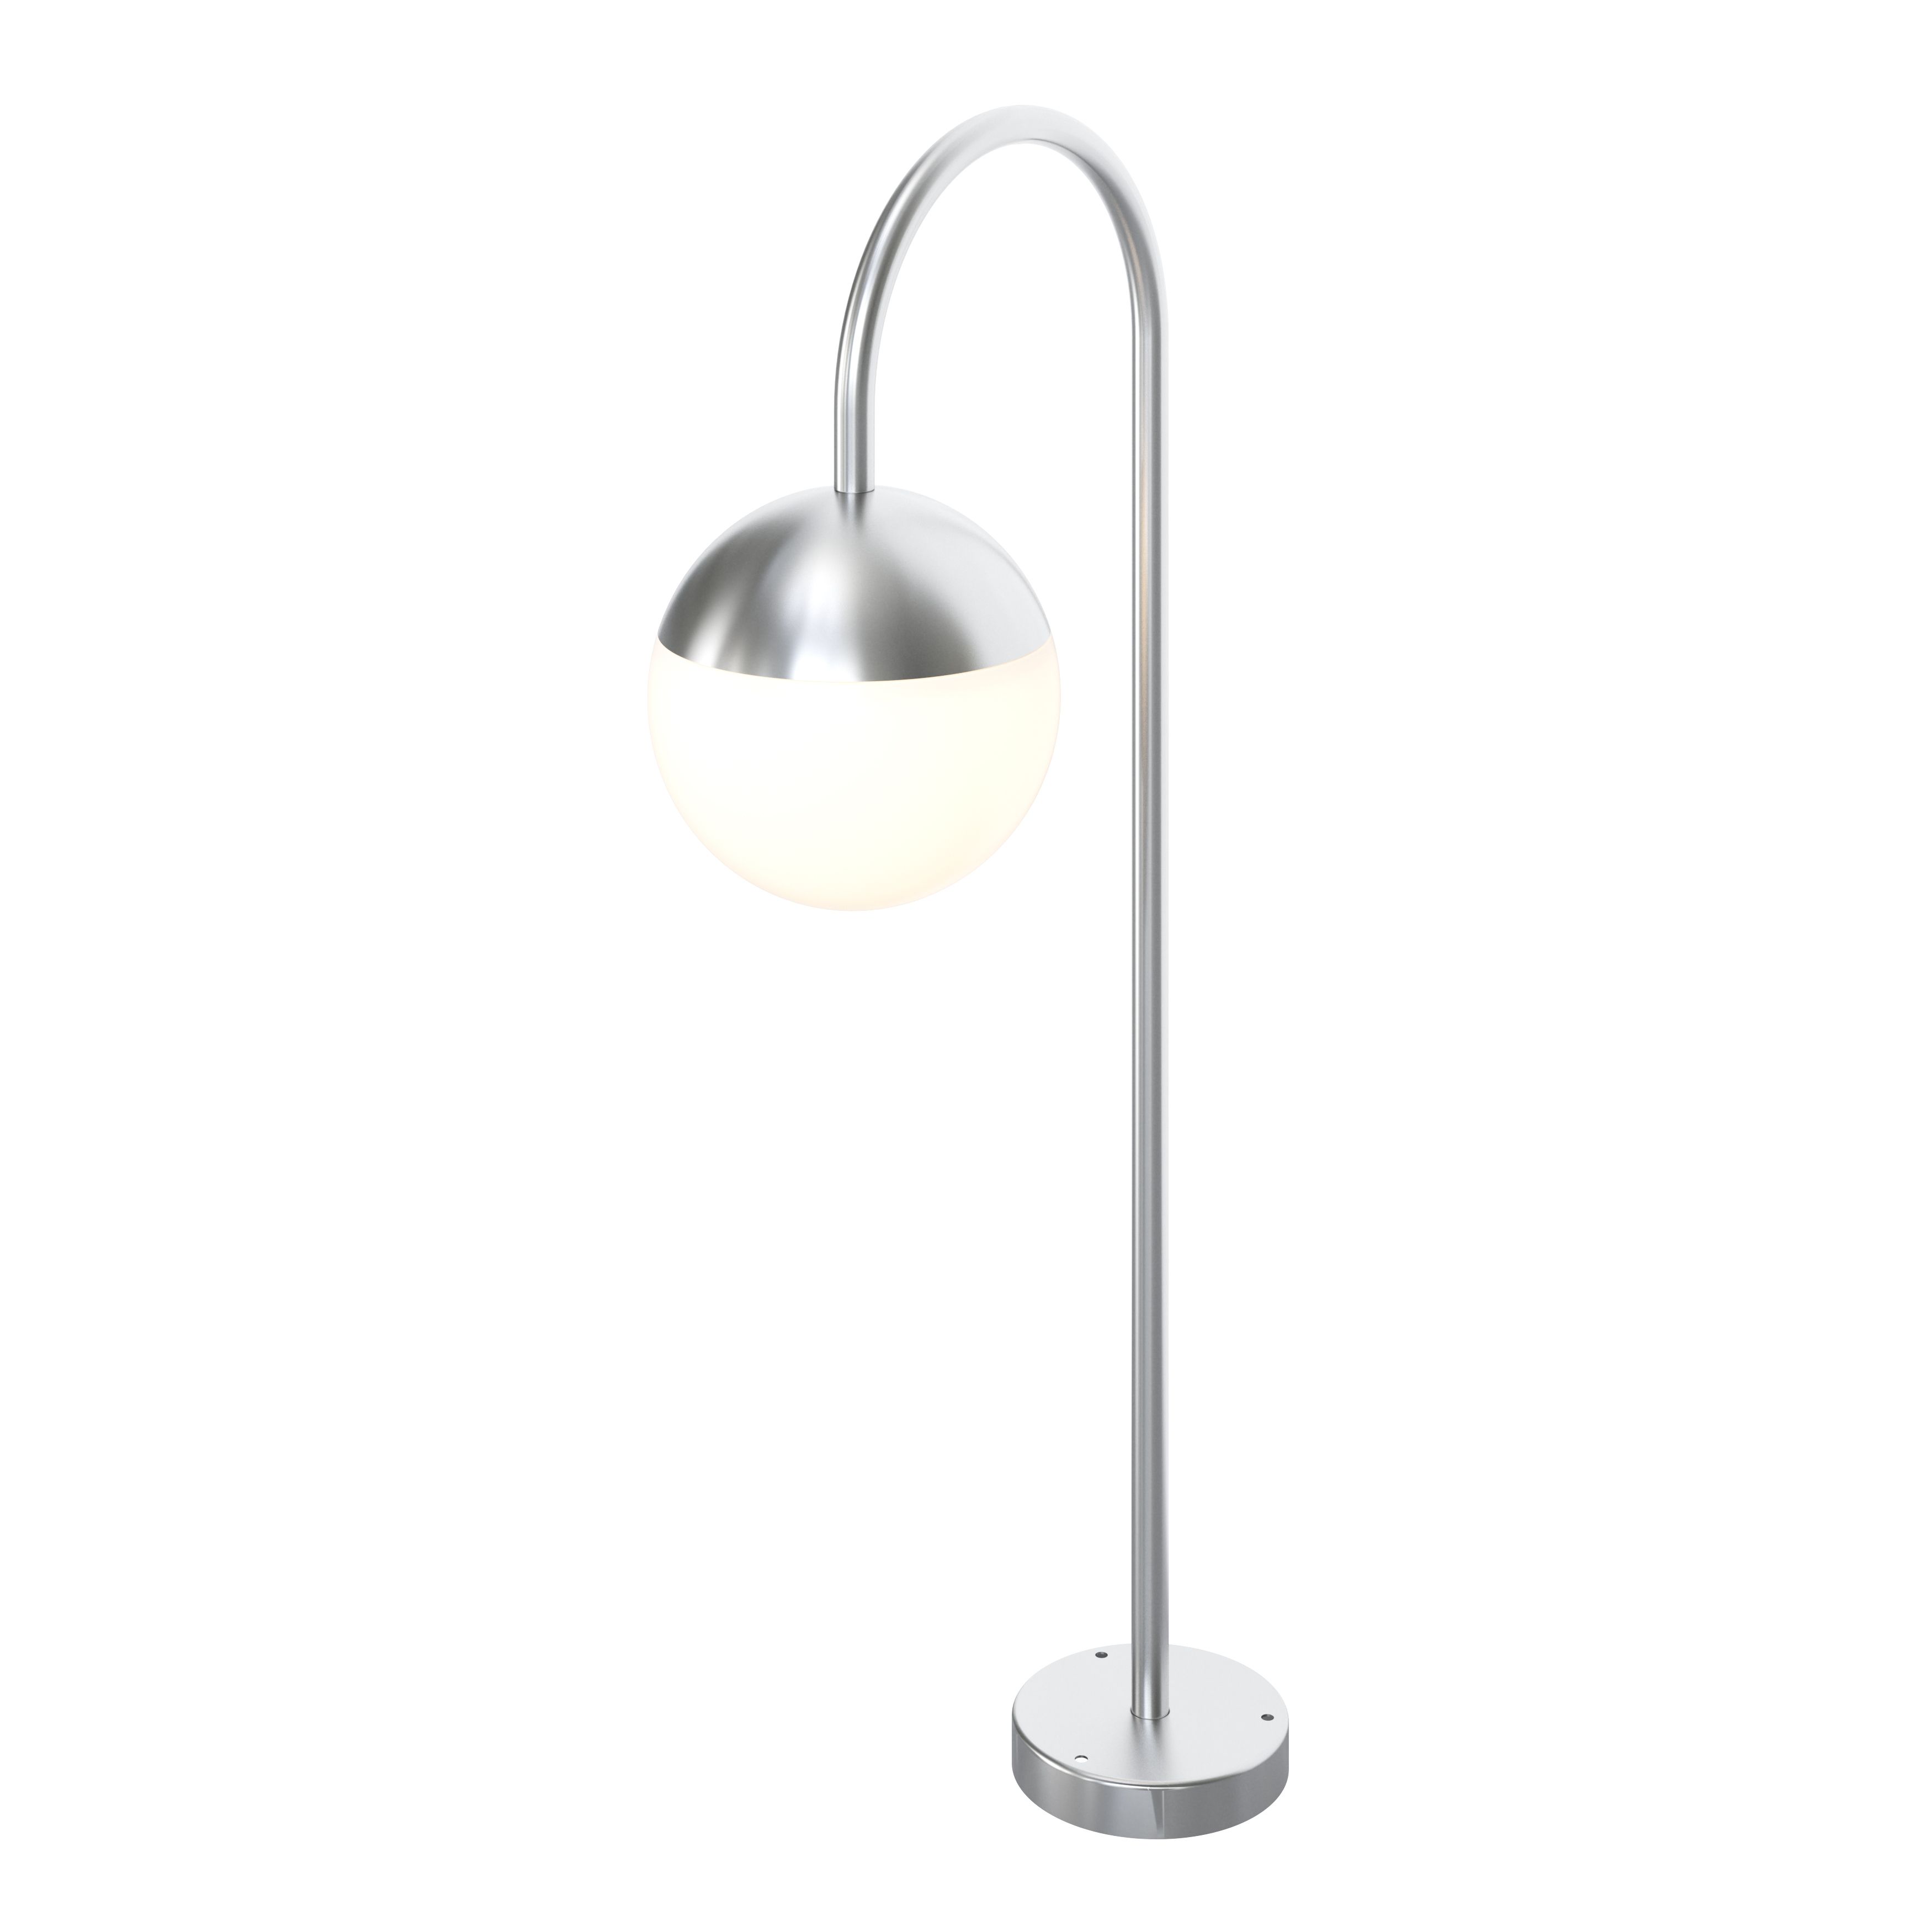 GoodHome Jarrow Stainless steel Mains-powered 1 lamp Outdoor Post light (H)700mm